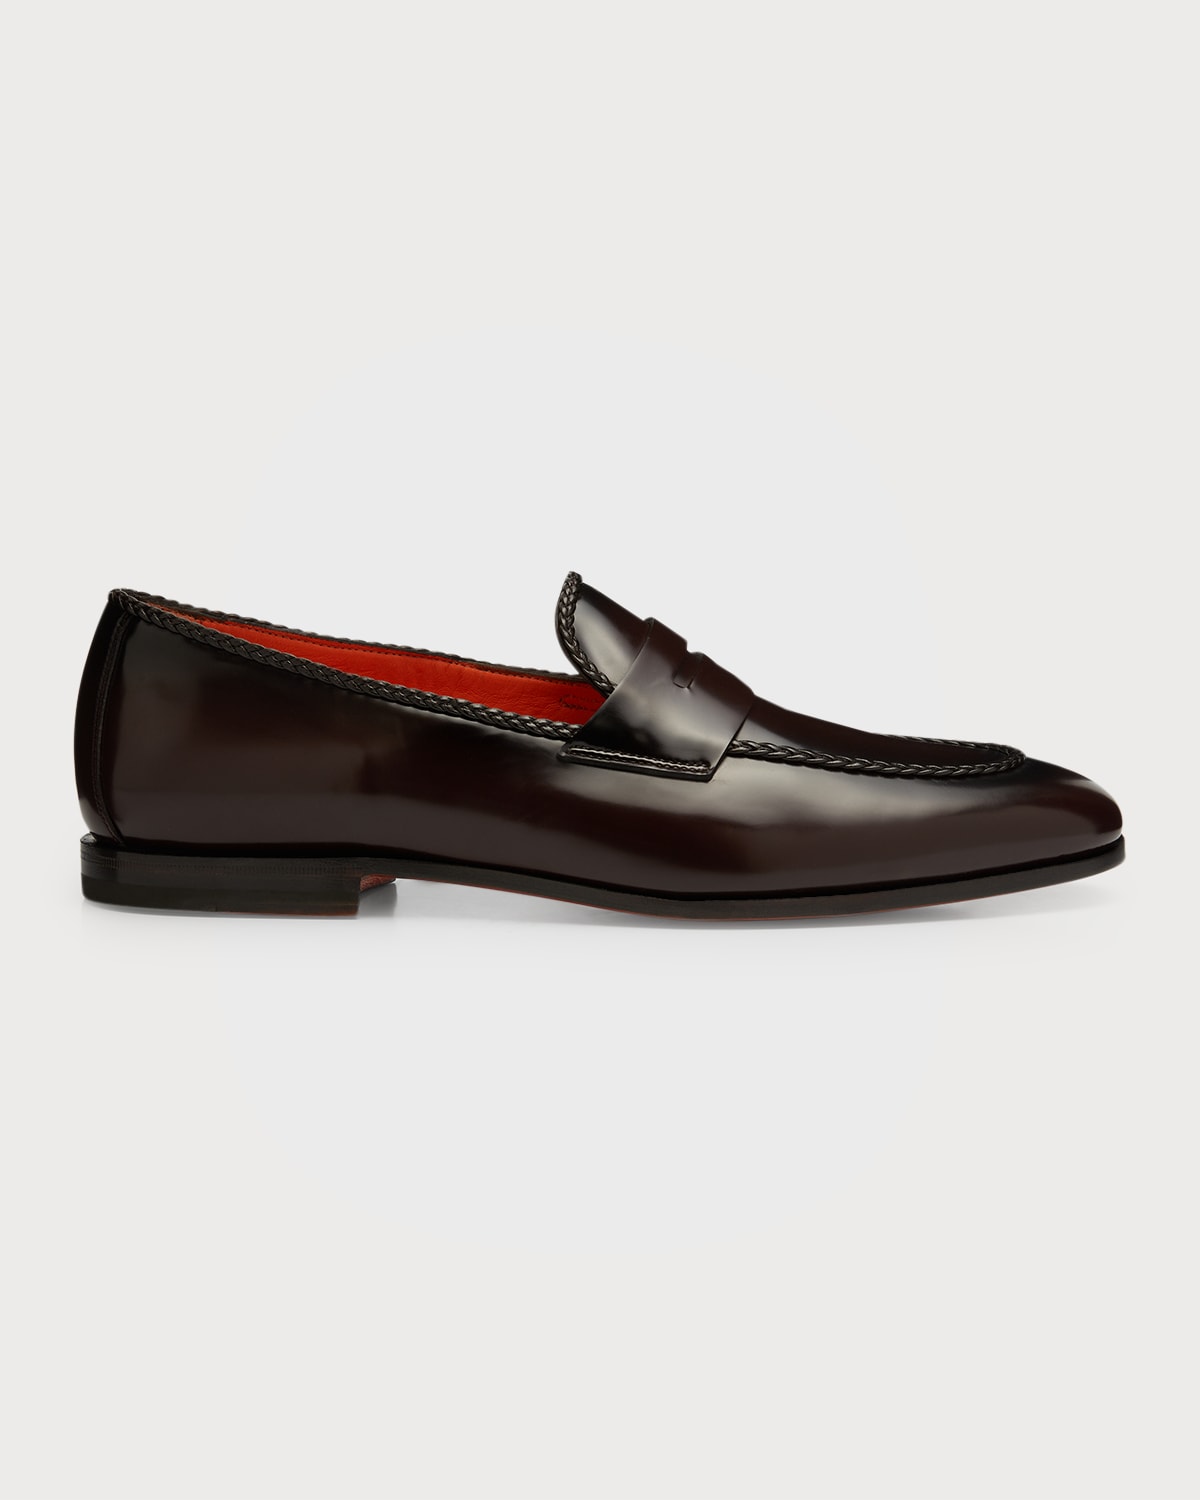 SANTONI MEN'S GRIFONE LEATHER PENNY LOAFERS